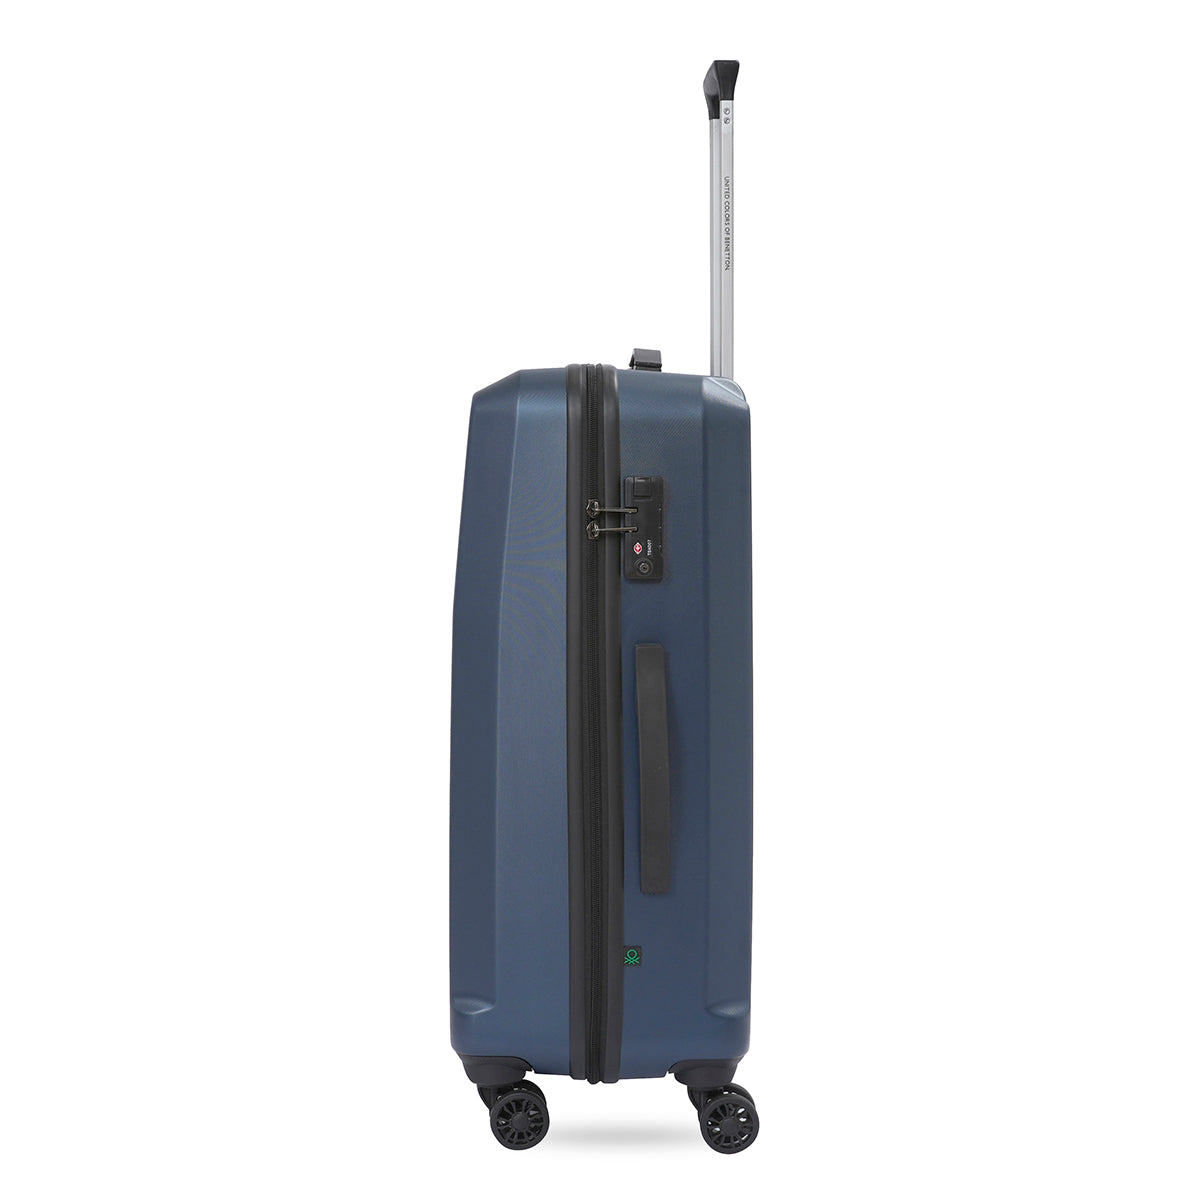 United Colors of Benetton Cobalt Hard Luggage Navy Mid